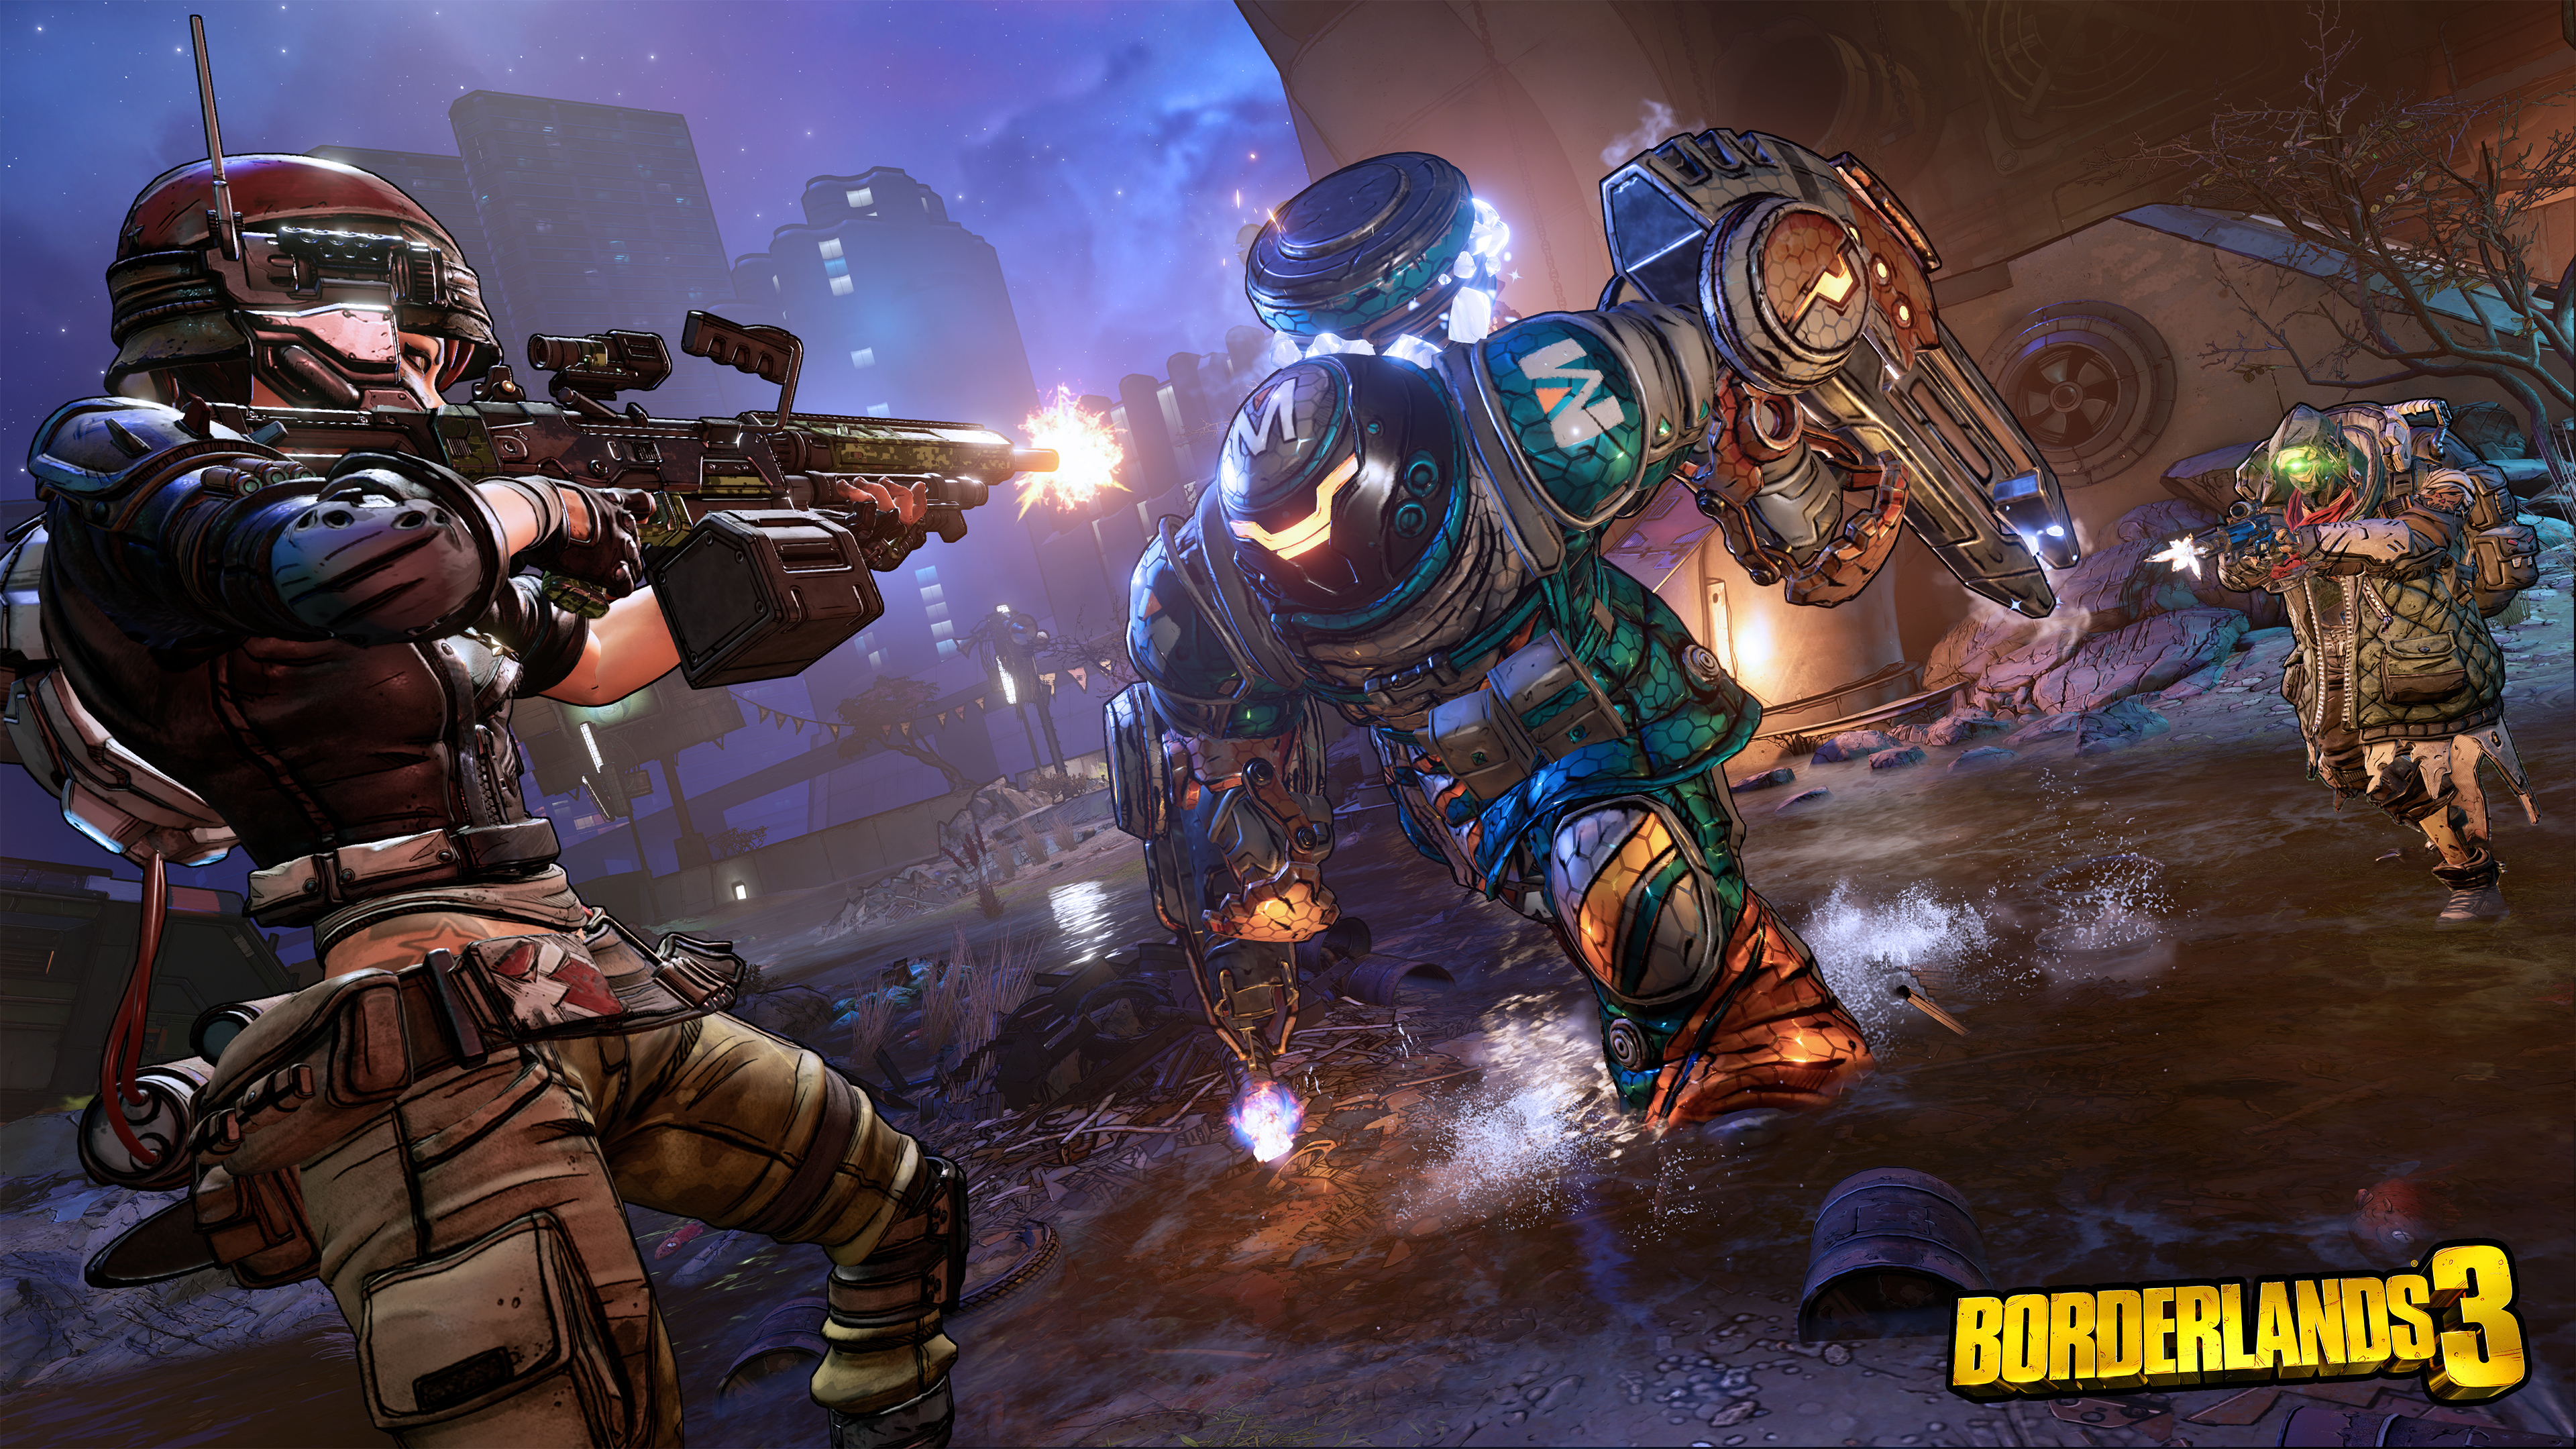 Wallpaper Borderlands 3, pc Game, Strategy Video Game, Shooter Game, Games,  Background - Download Free Image